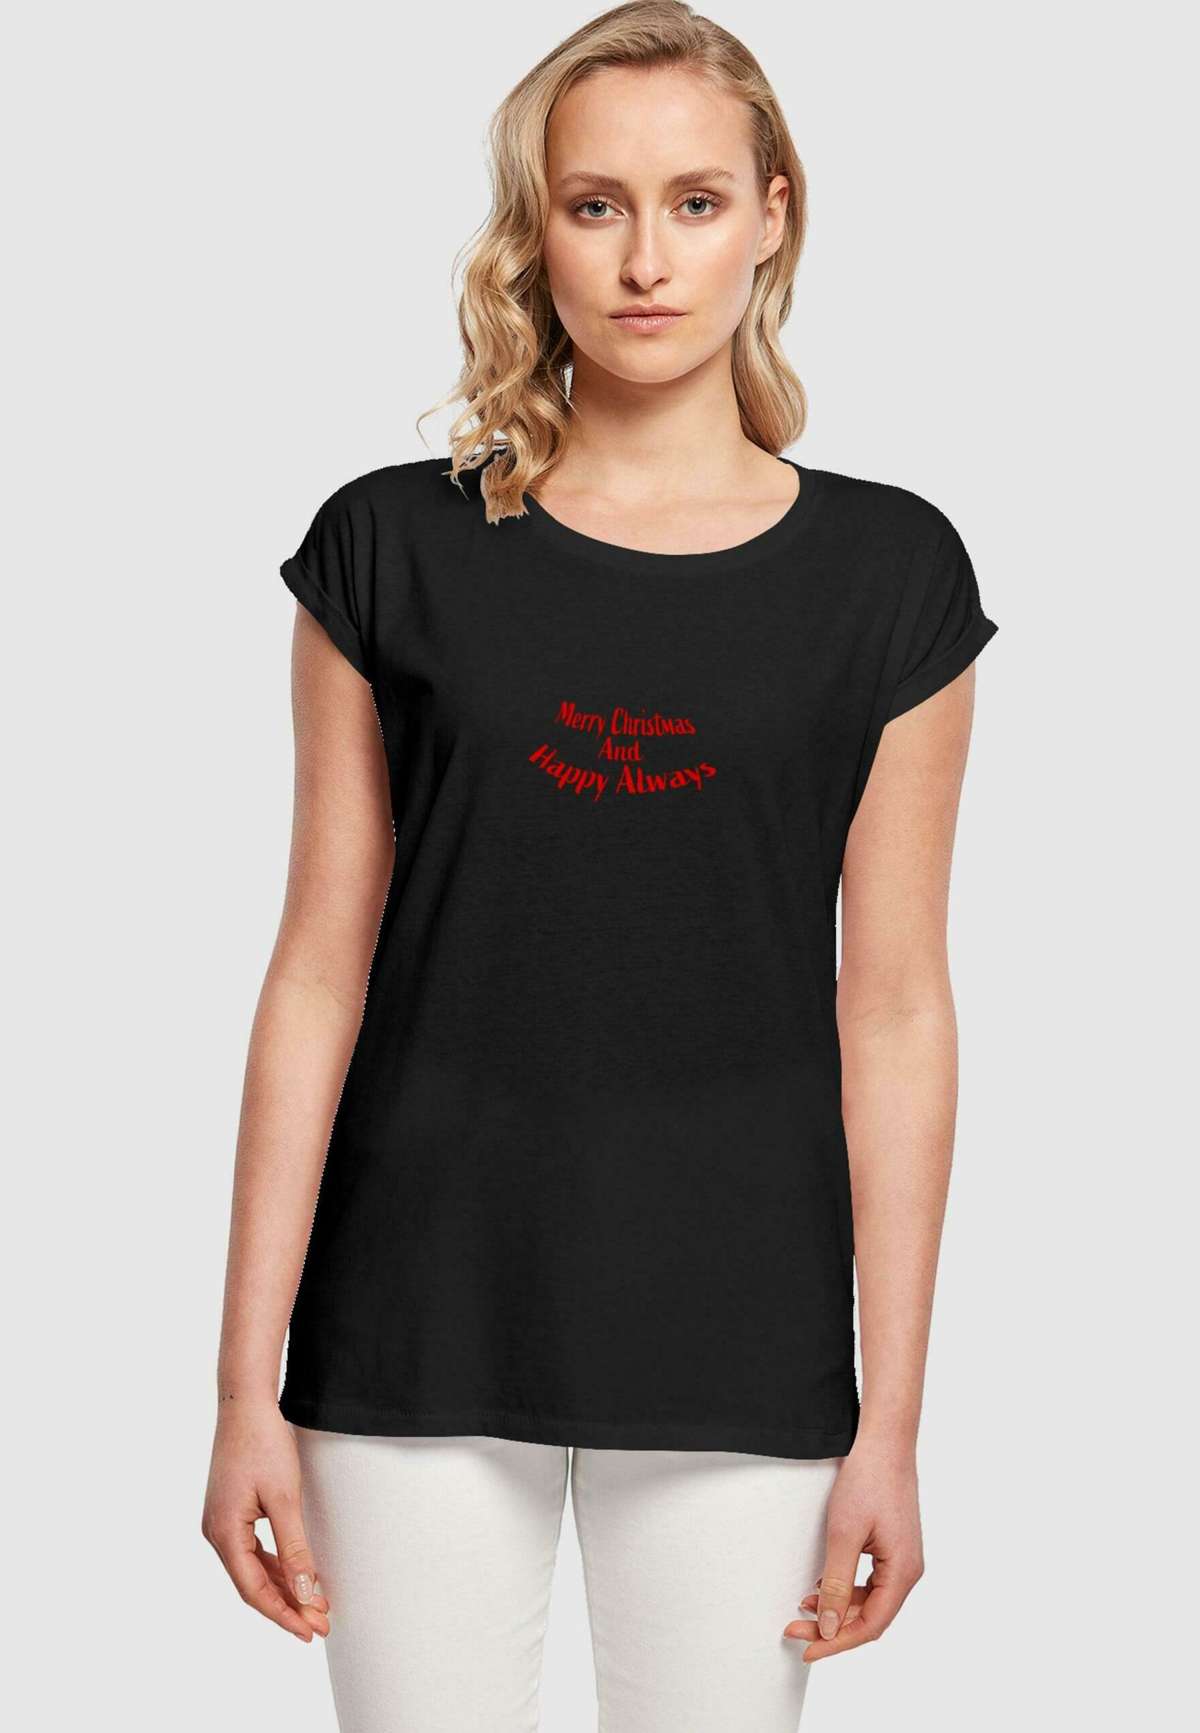 Футболка MERRY CHRISTMAS AND HAPPY ALWAYS EXTENDED SHOULDER TEE